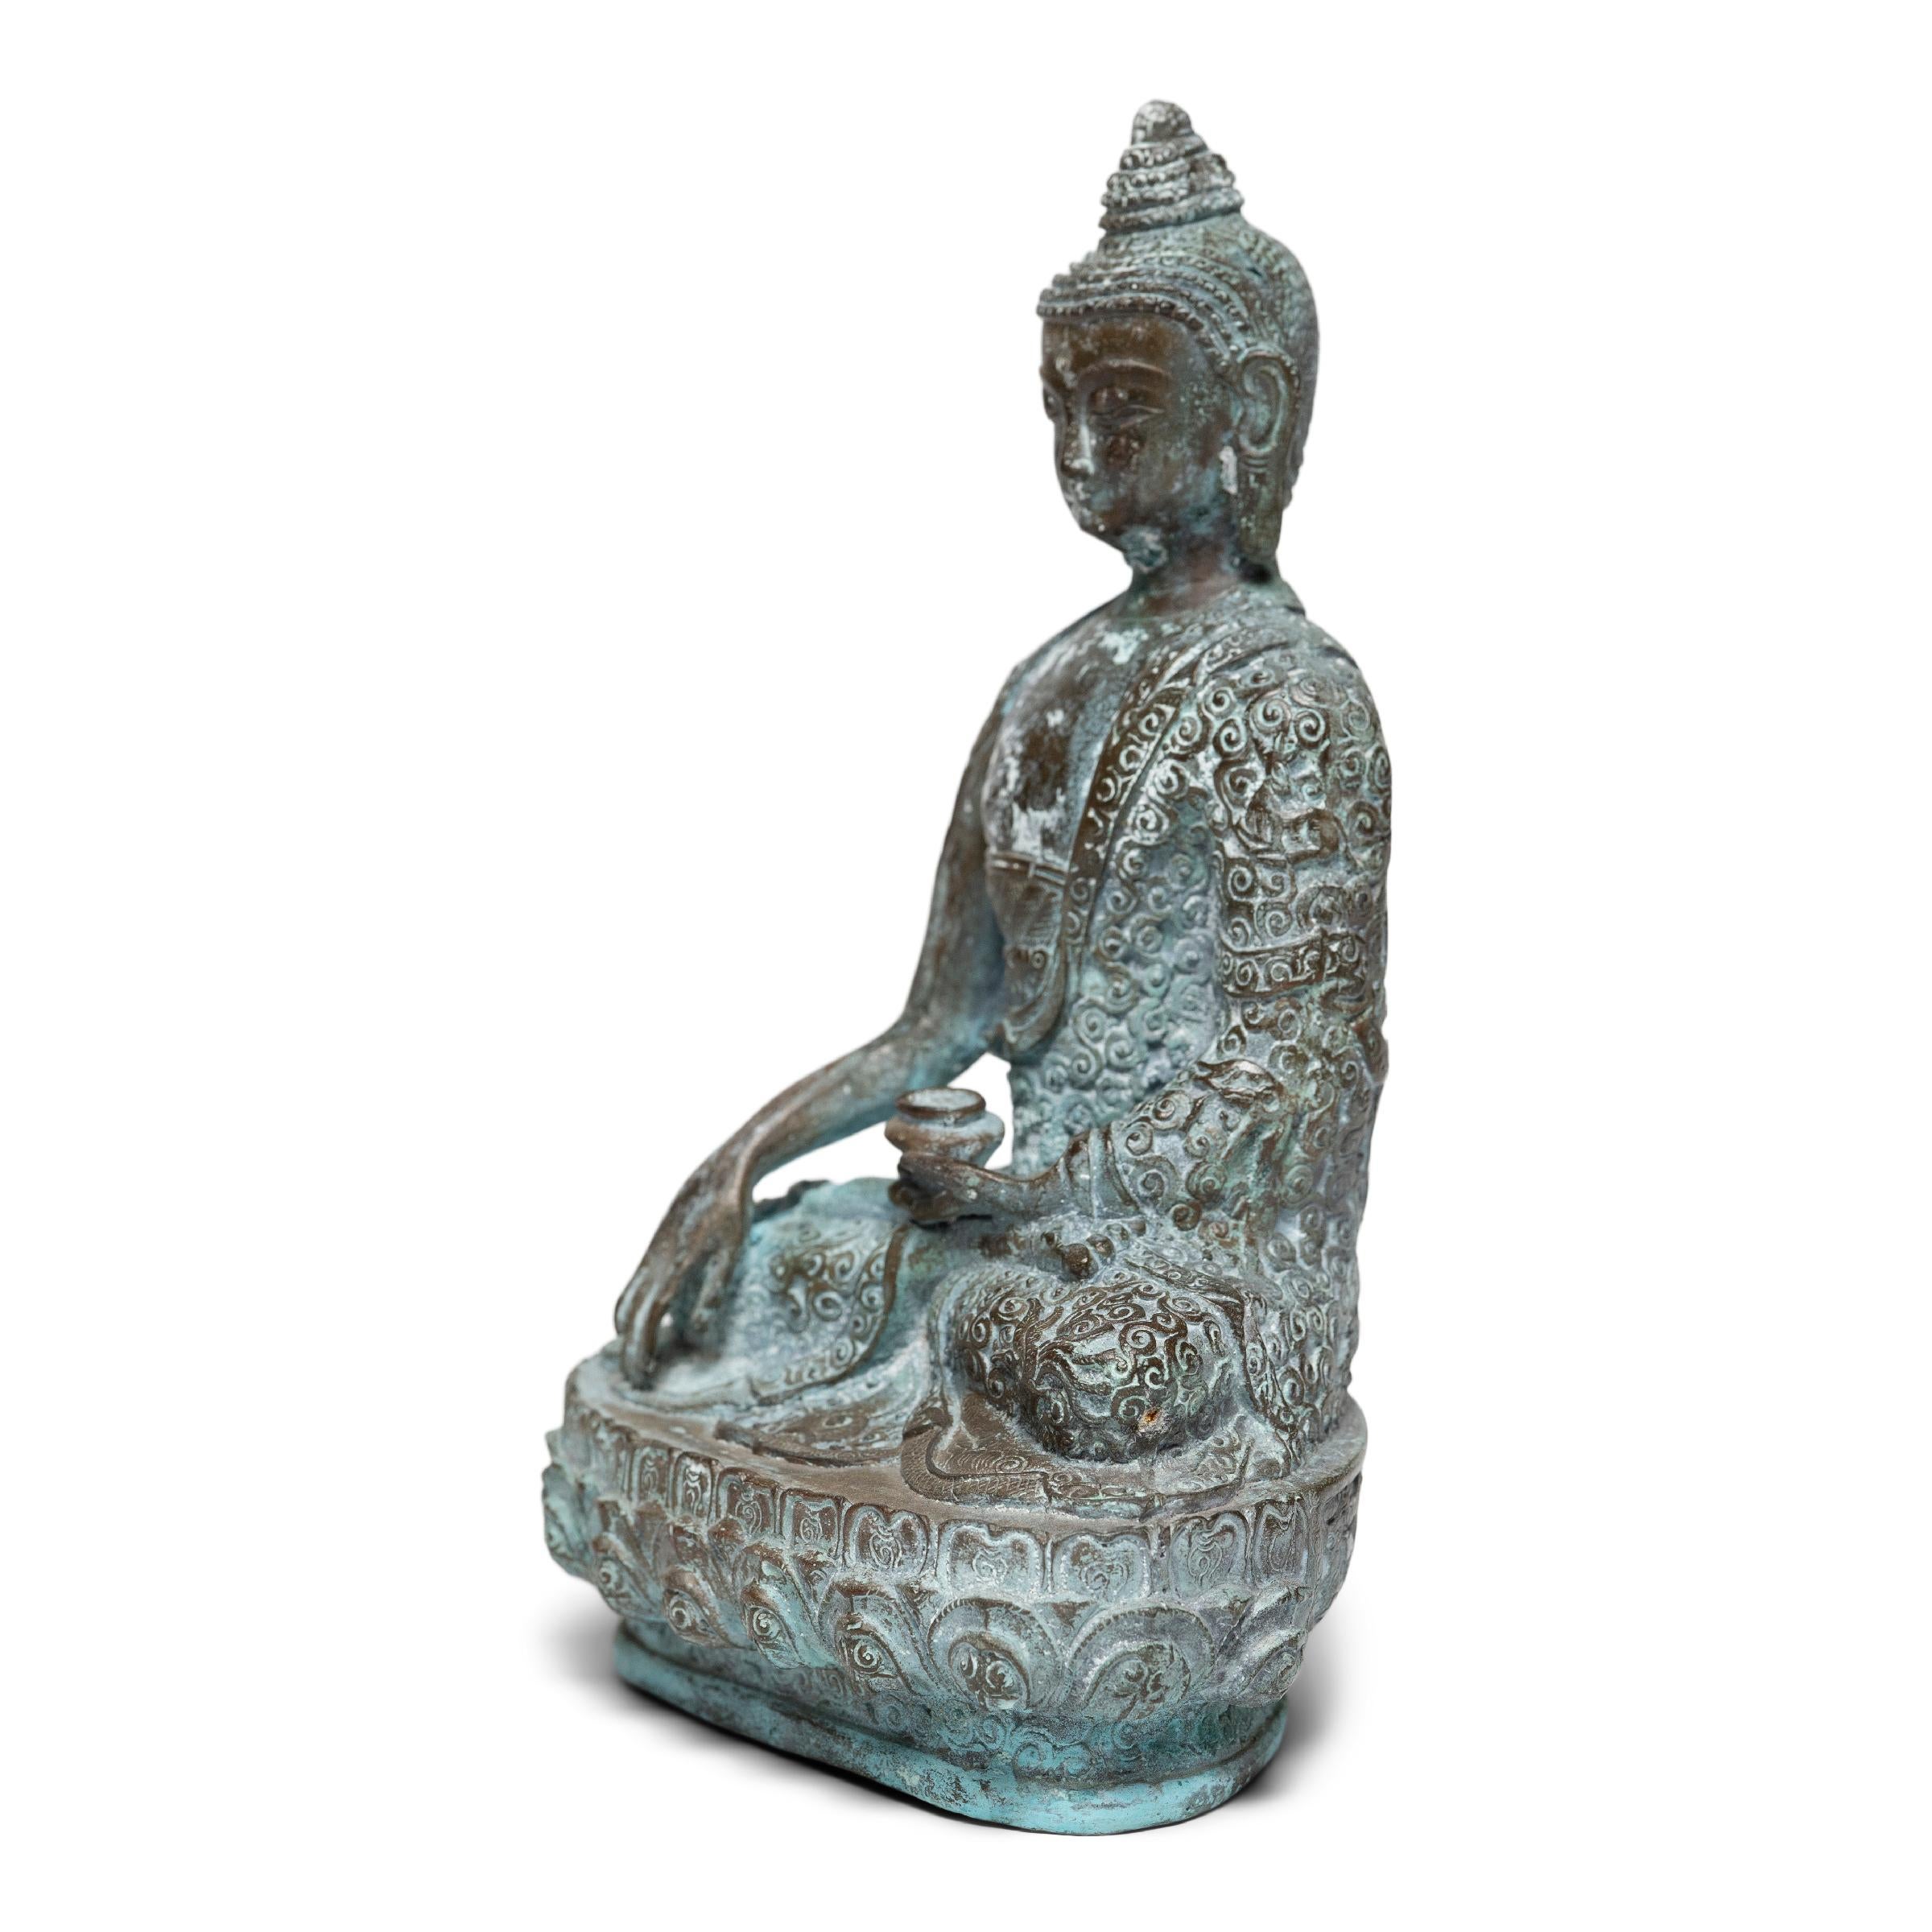 Dated to the Qing dynasty, this 19th-century bronze figure depicts the historical Buddha, known also as Shaka, Shakyamuni, or Siddhartha Gautama. Seated upon a double lotus base with a delicately flowing robe and elaborate coiffure, the Buddha